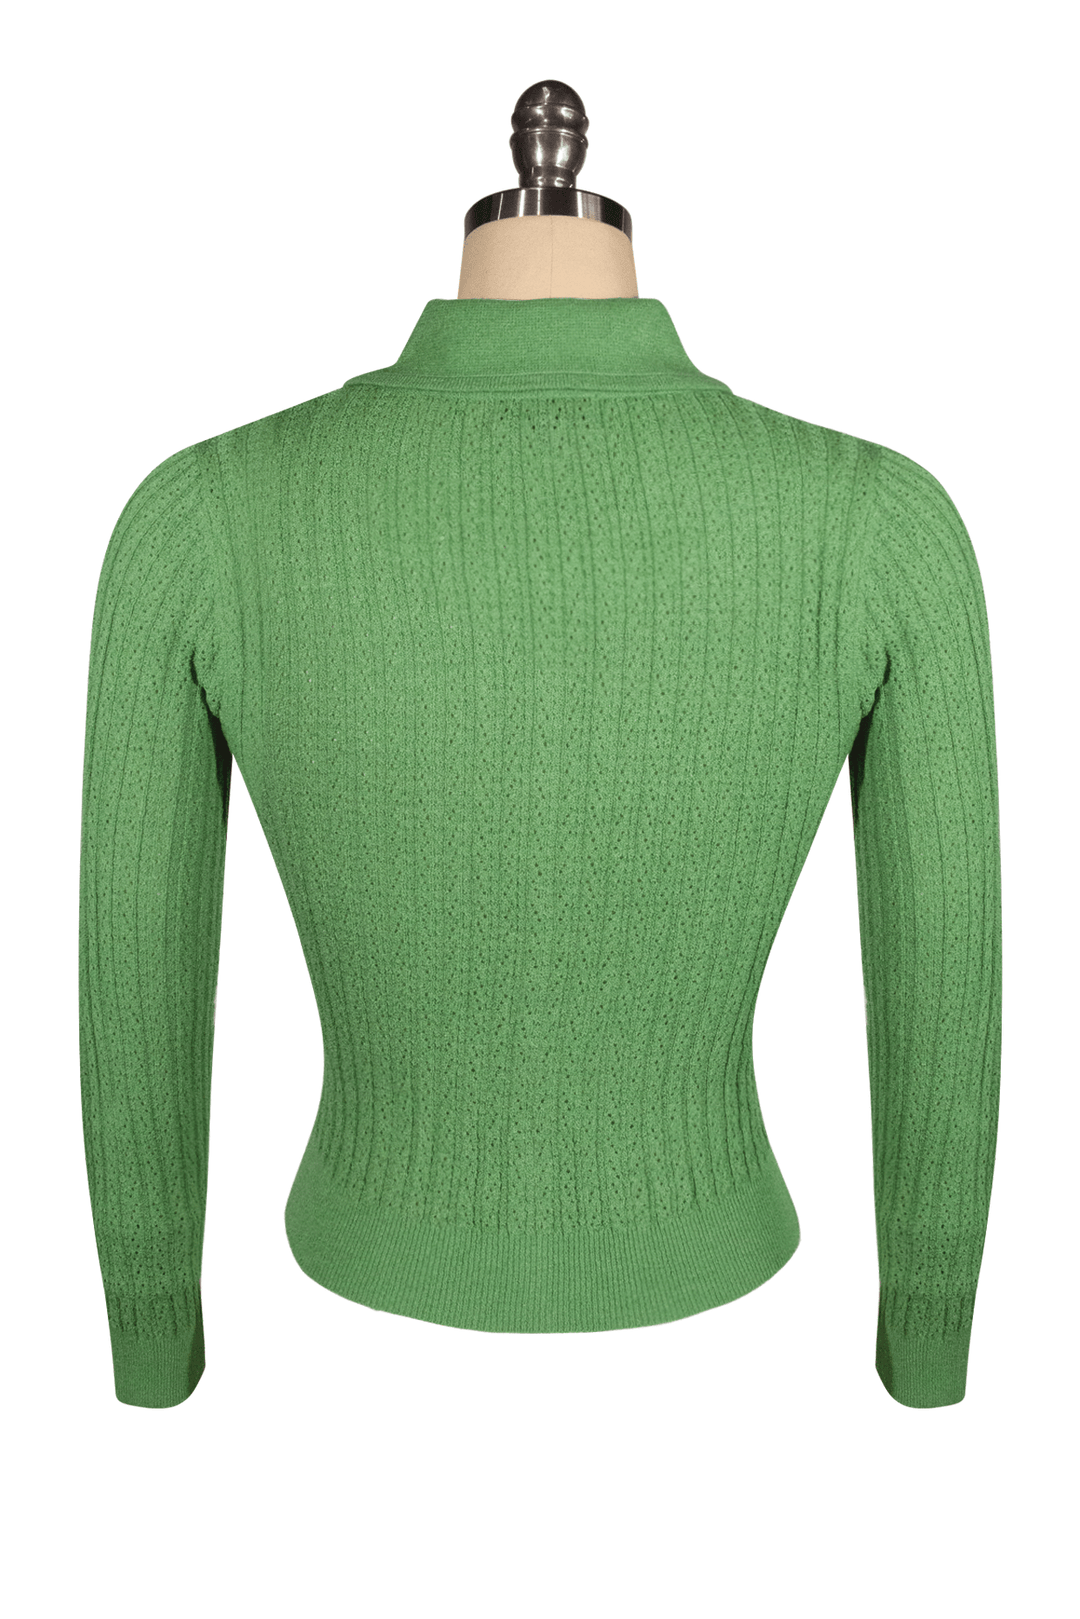 D'Amour Dickens Cardigan (Green) - Kitten D'Amour